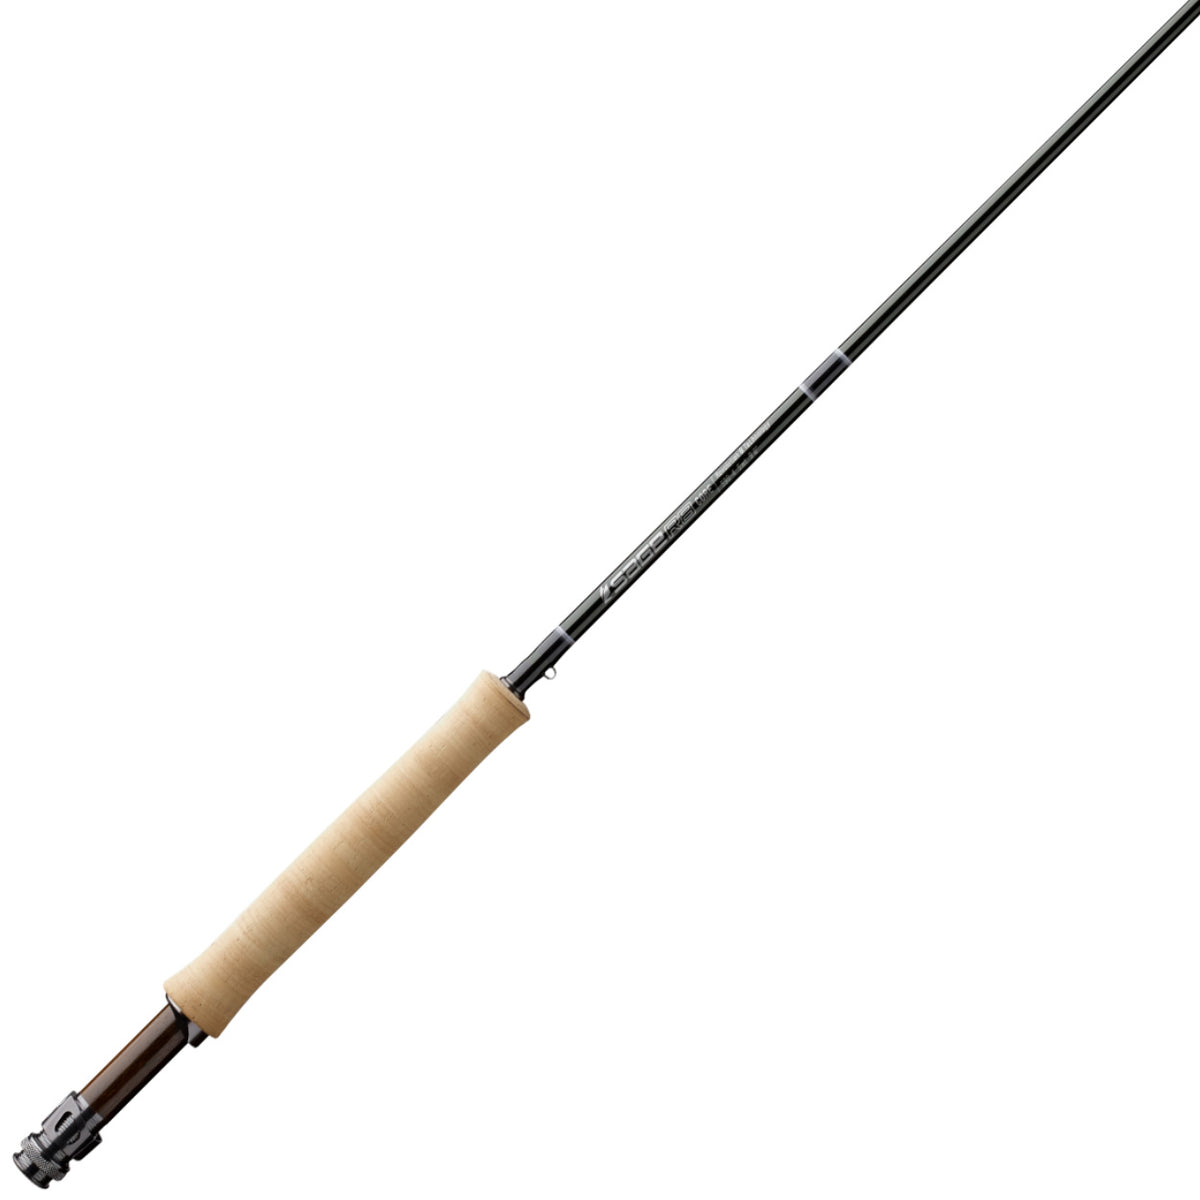 Sage R8 Fly Rod - 486-4 - 4wt 8ft 6in 4 pc